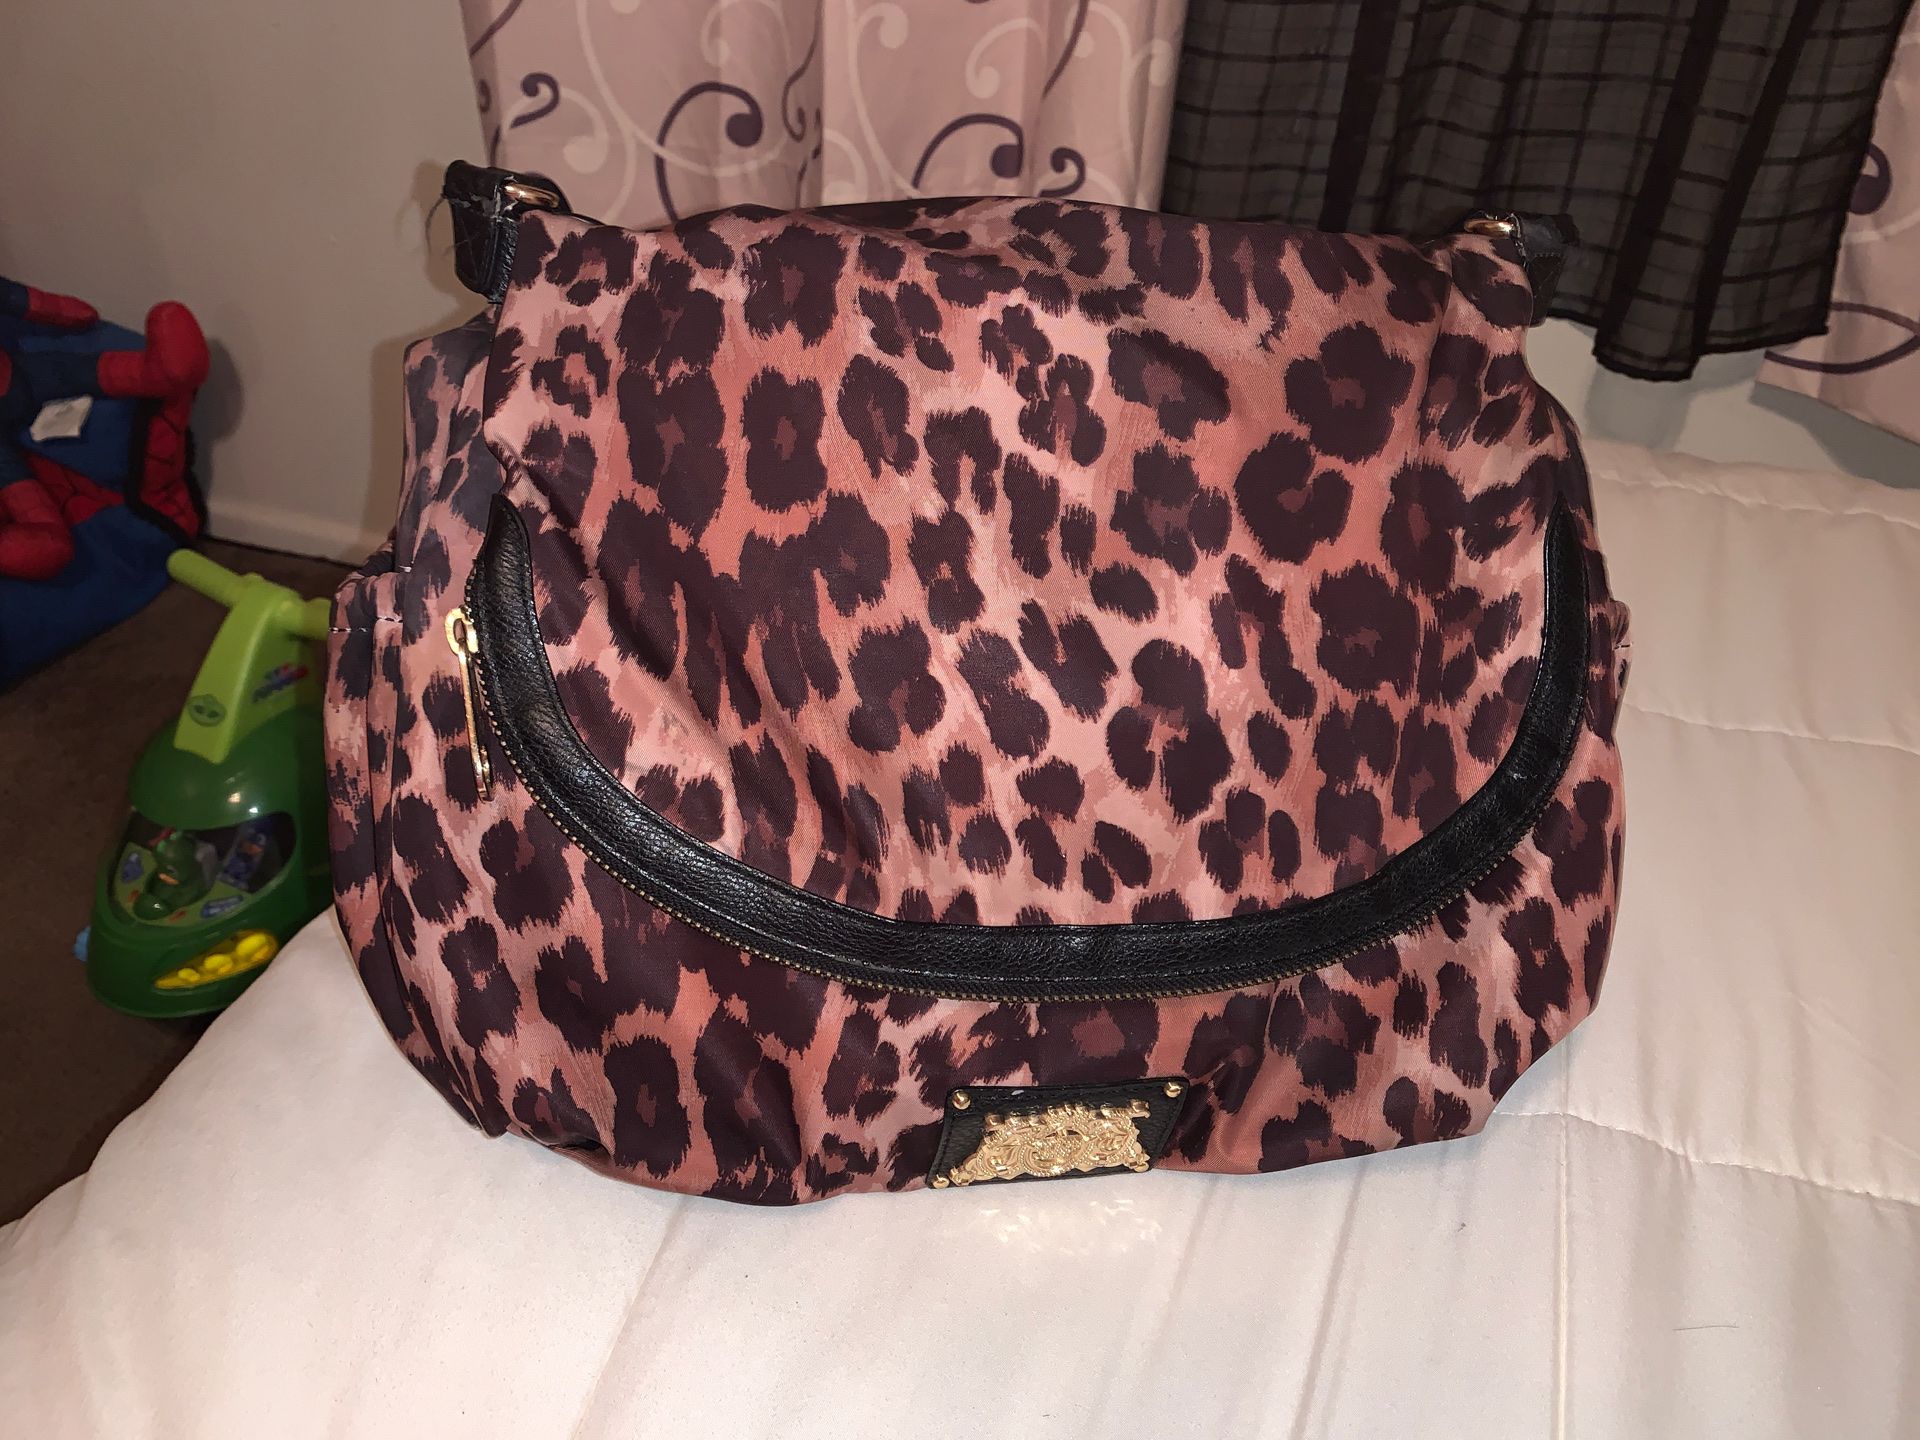 Juicy Couture diaper bag w changing pad lk new $65